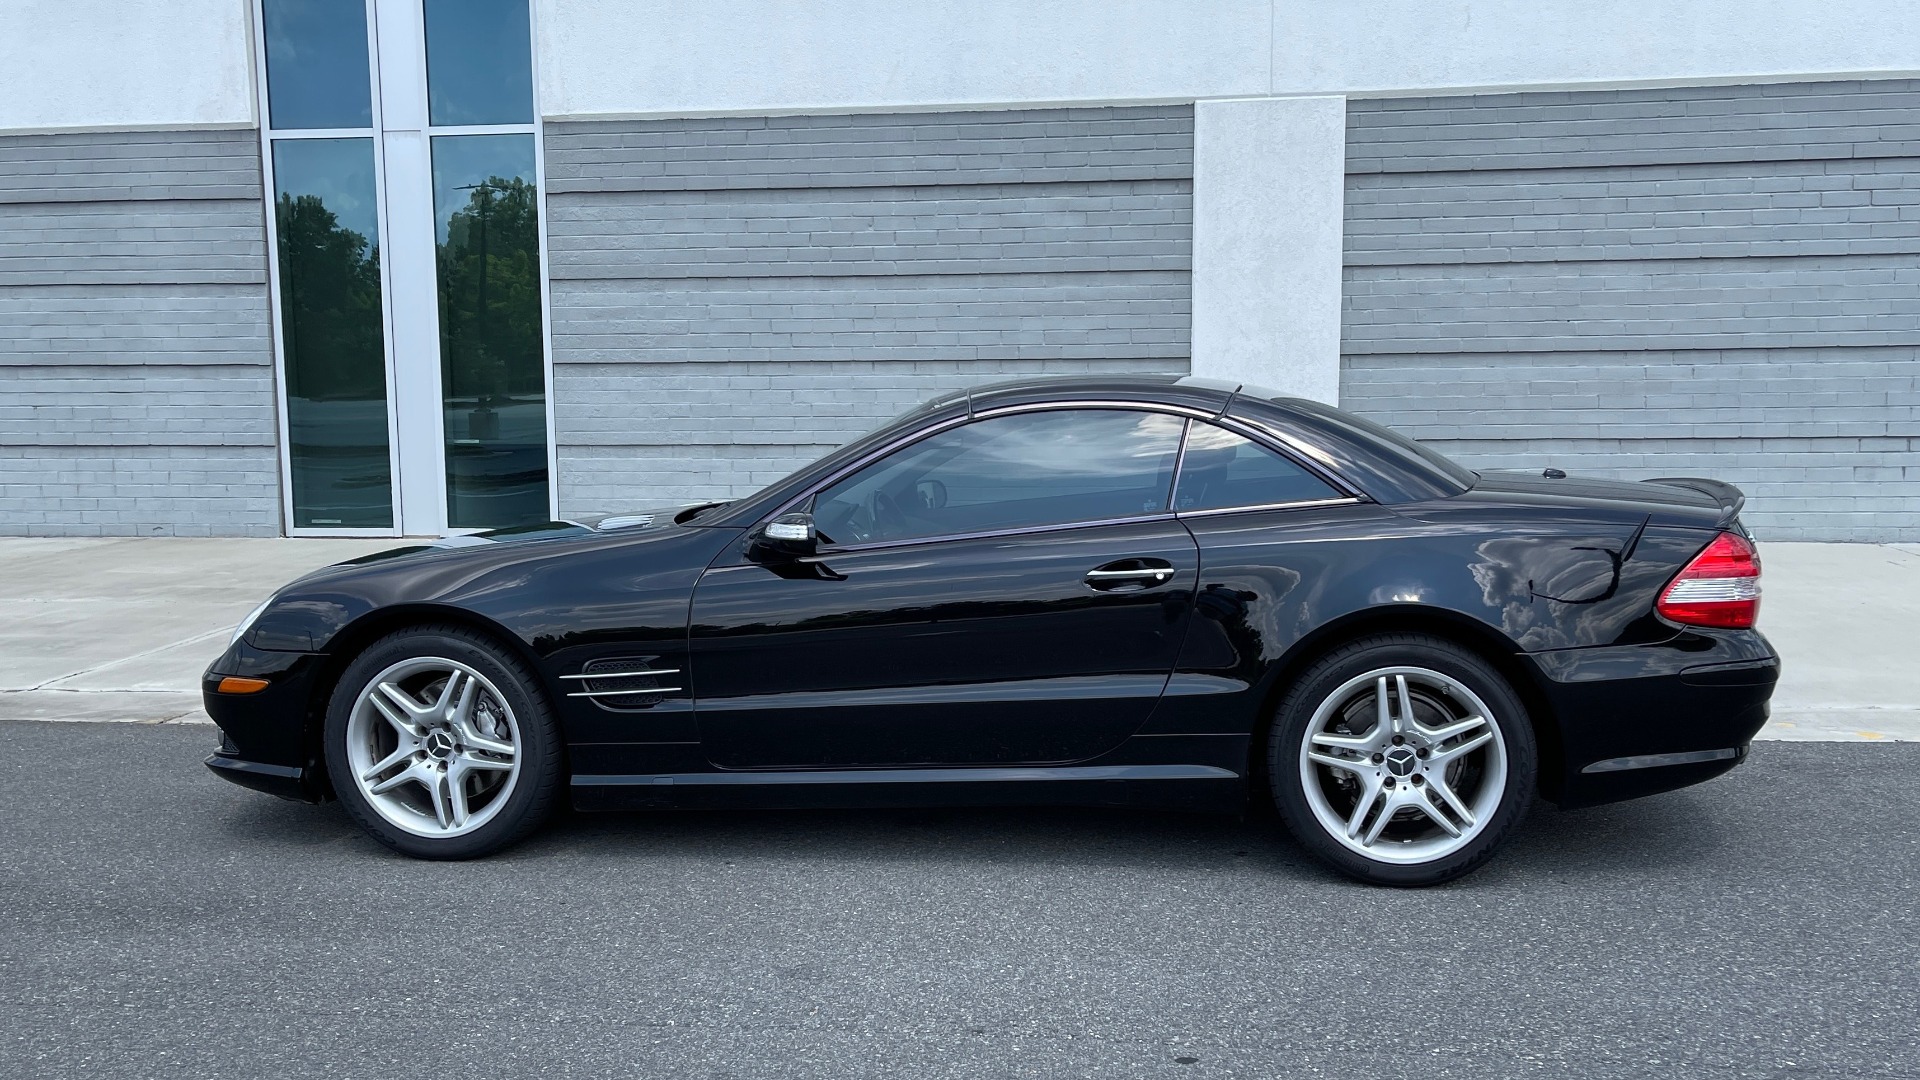 Used 2007 Mercedes-Benz SL-CLASS SL550 ROADSTER / 5.5L V8 / AMG SPORT PKG / BI-XENON HEADLAMPS for sale Sold at Formula Imports in Charlotte NC 28227 6